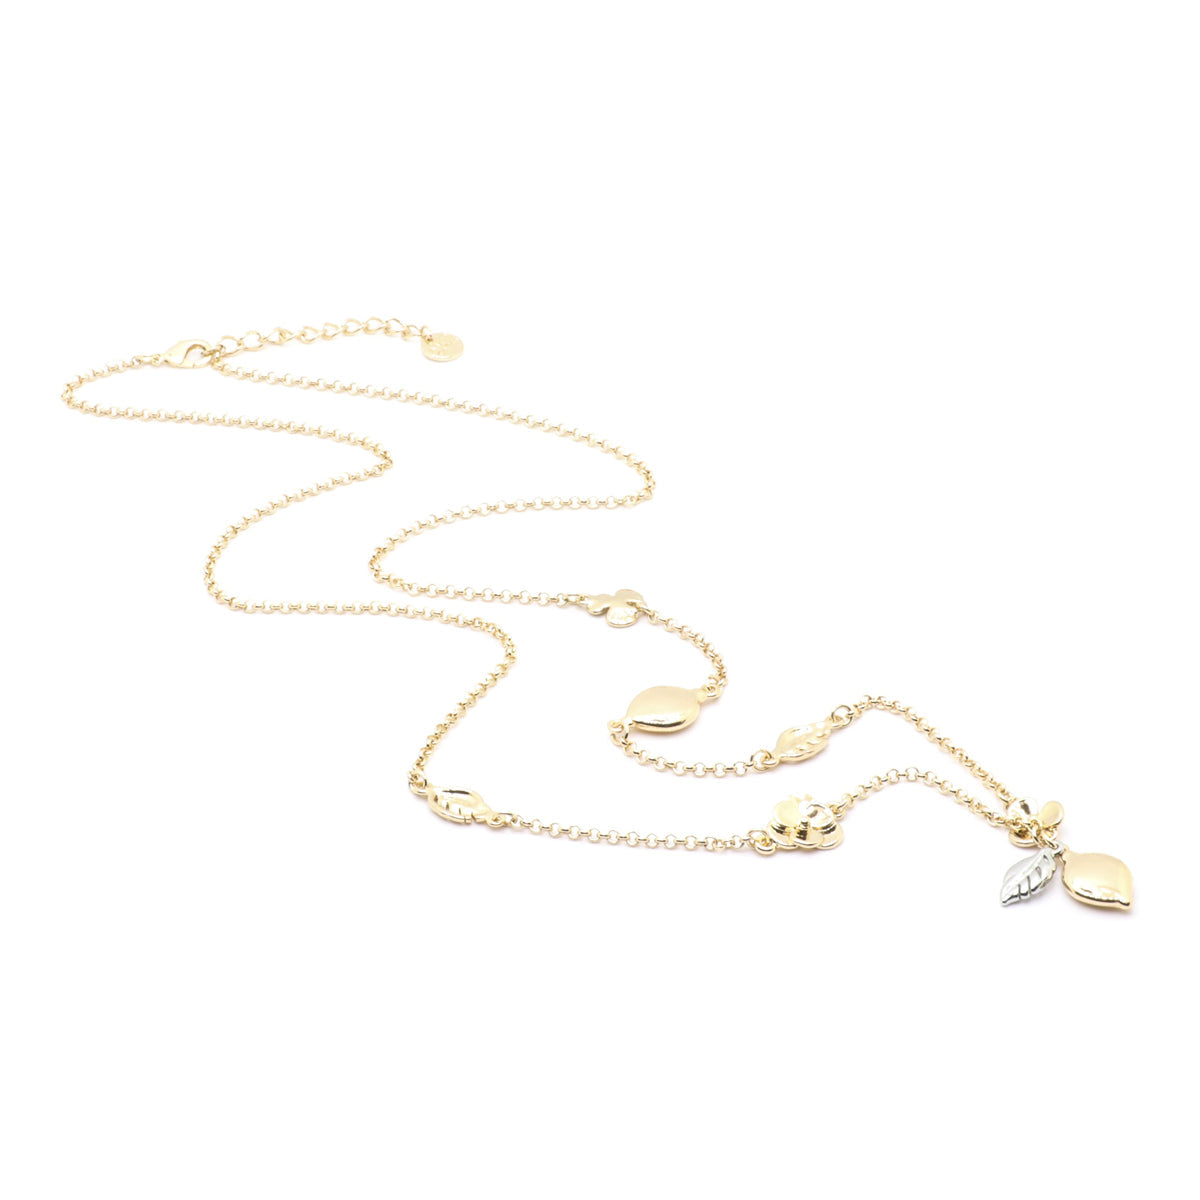 Long chain metal necklace, with lemon pendant with two -tone leaf